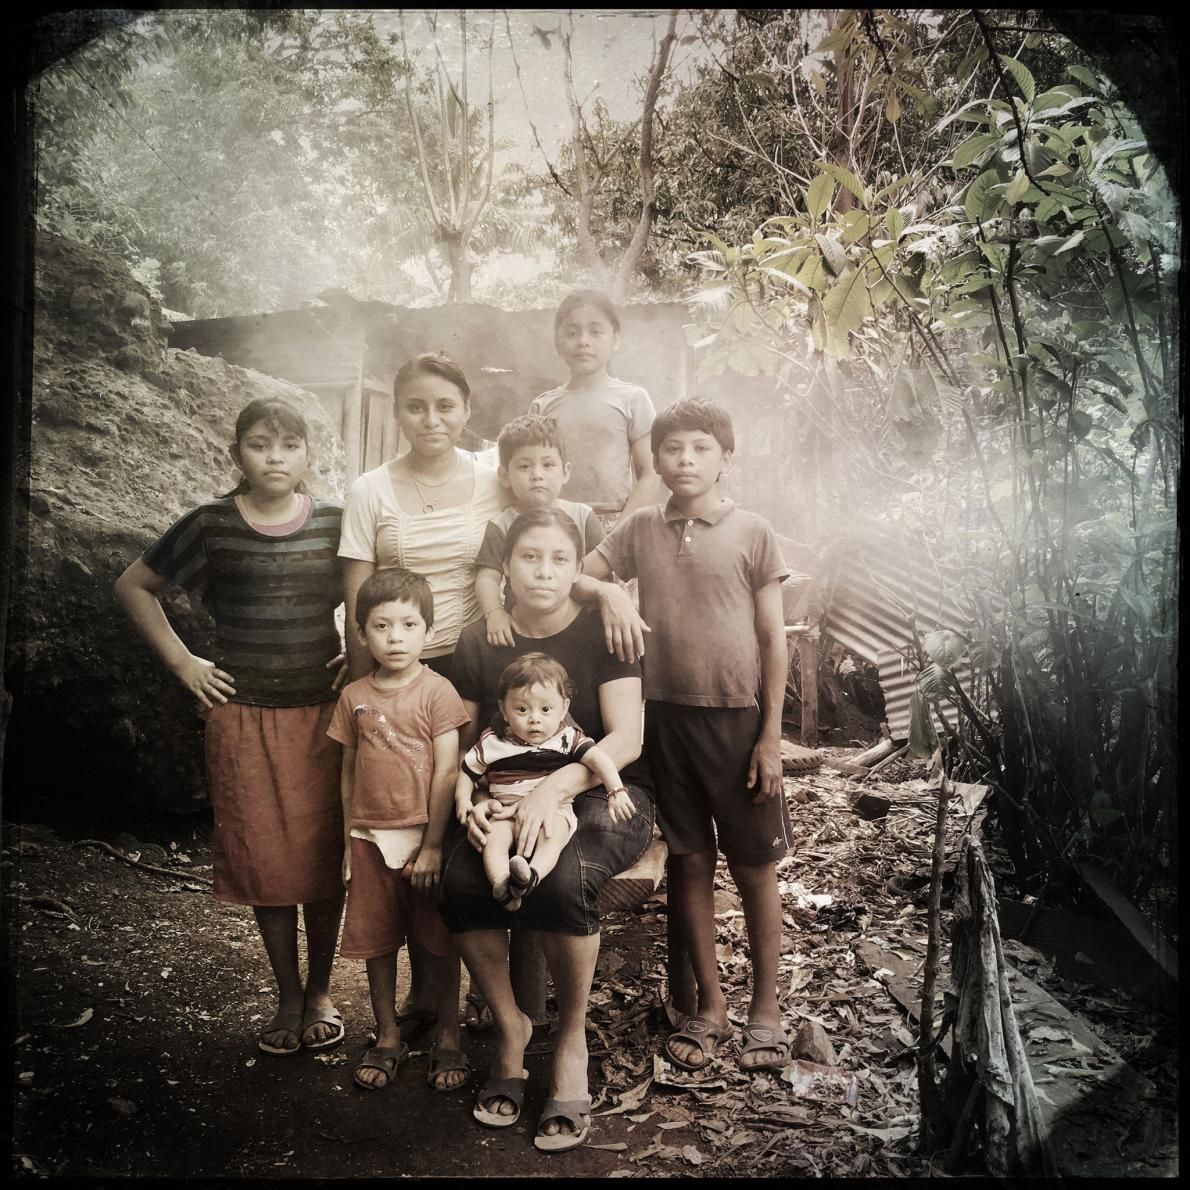 Nancy López surrounded by her children. The family has an EcoComal plancha stove that is vented but they are surrounded by their neighbor’s smoke. There is no escape. Image by Lynn Johnson. Guatemala, 2017.